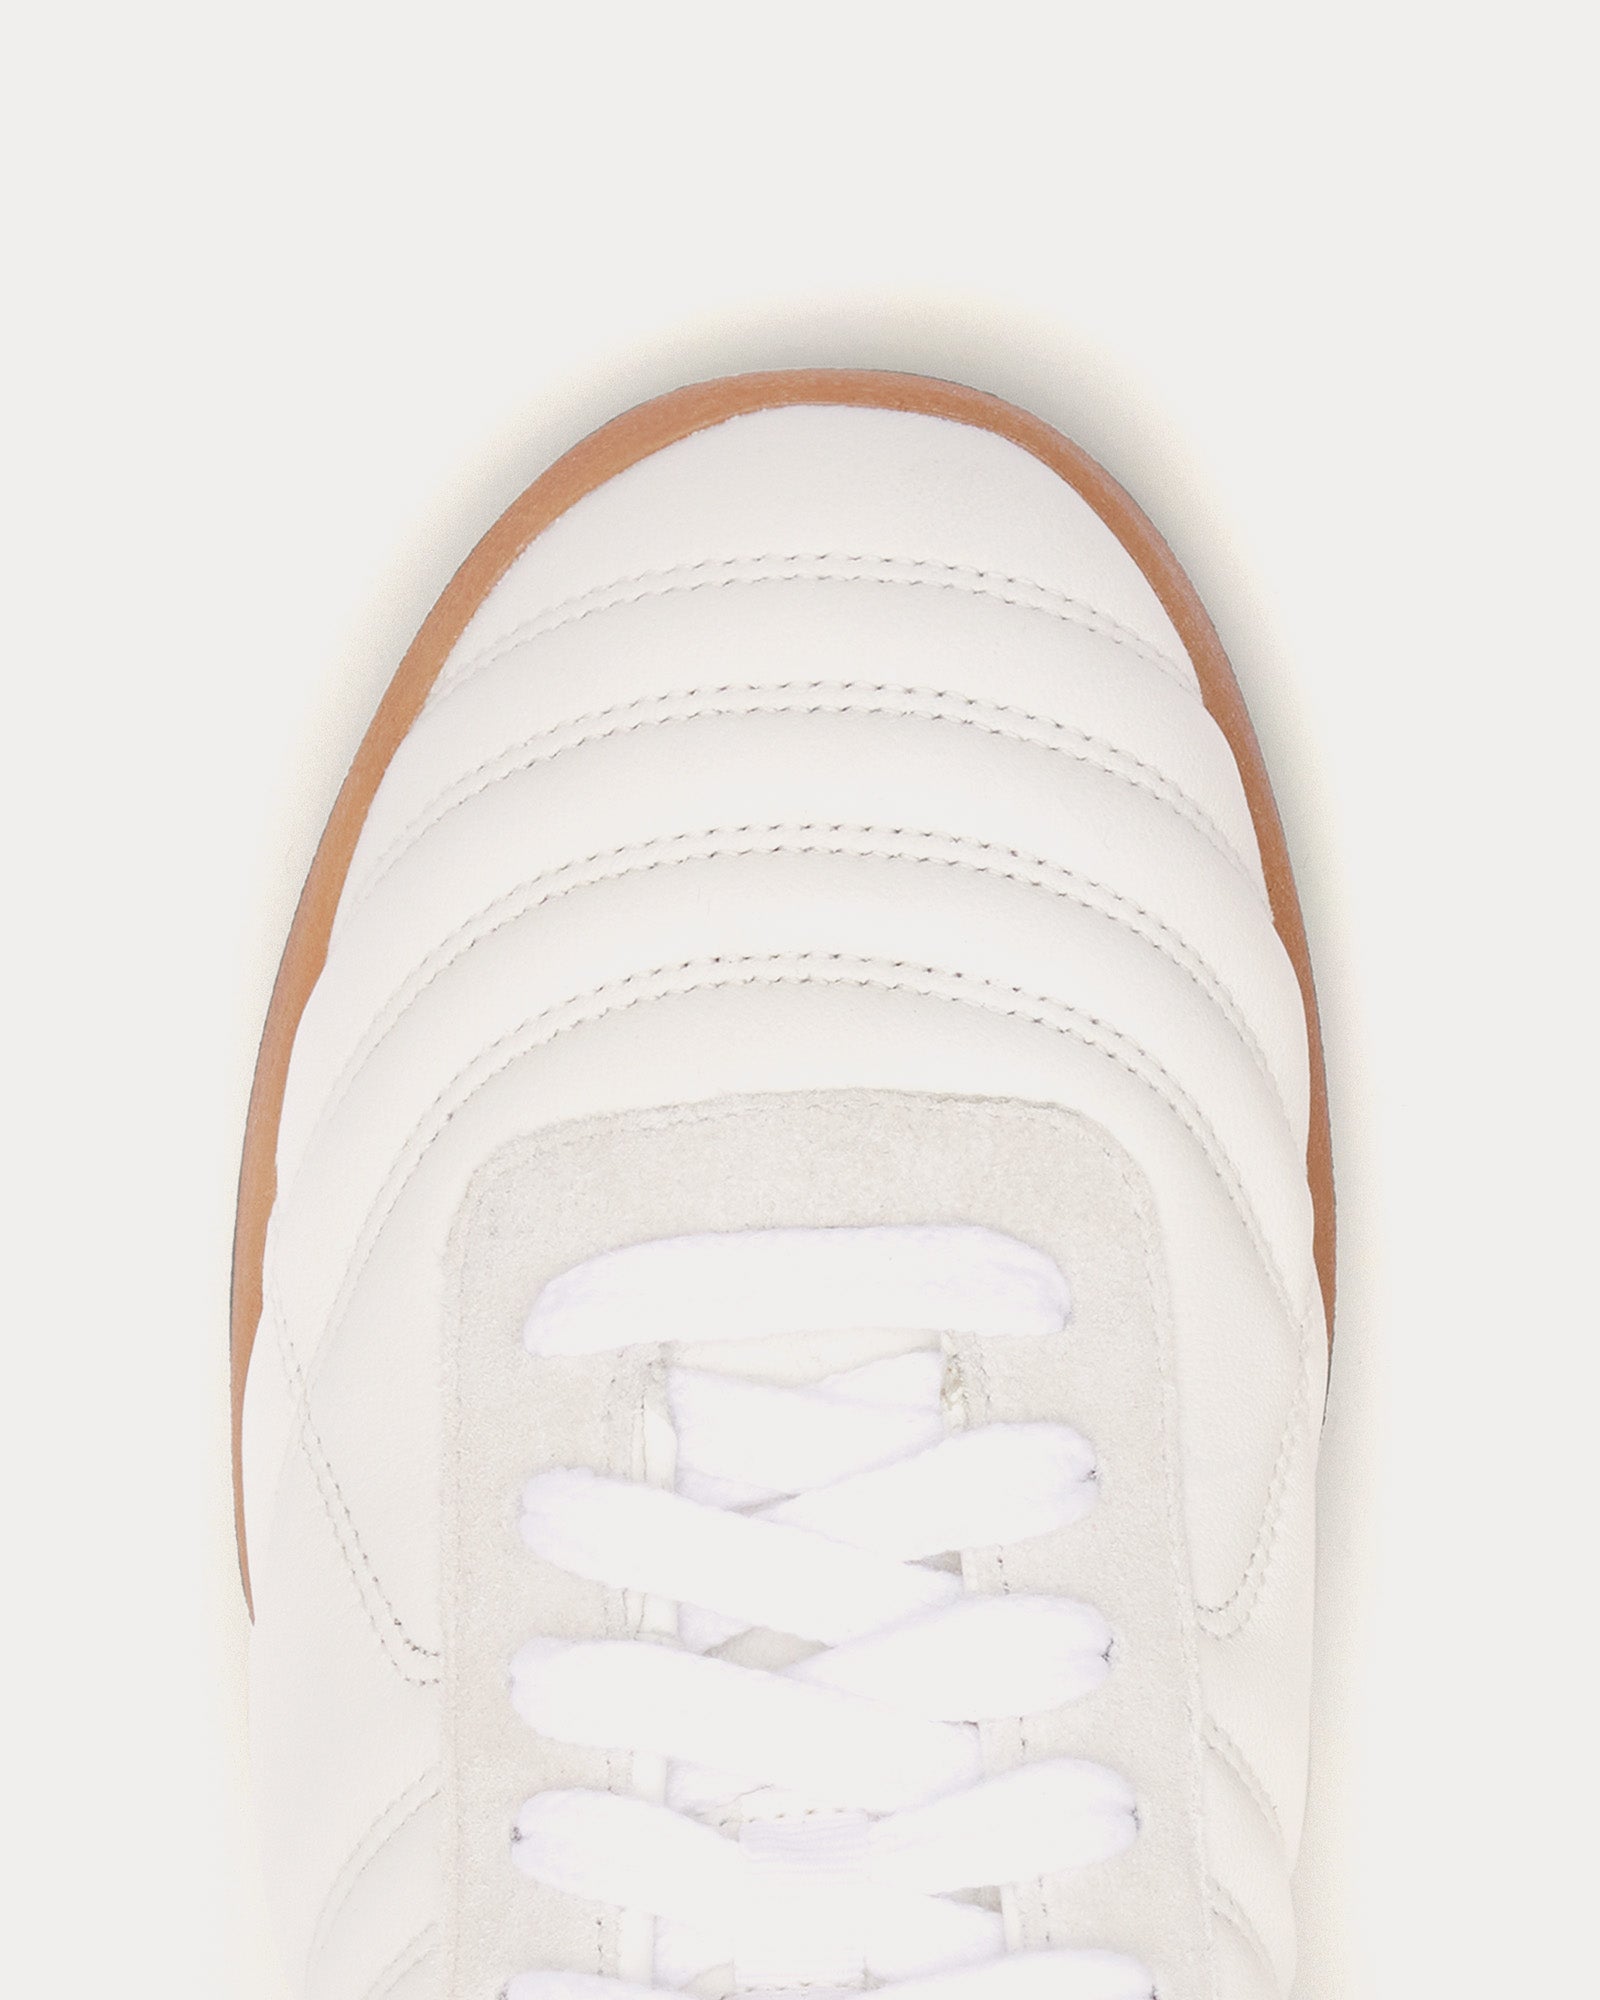 Courrèges - Club 02 Leather Heritage White Low Top Sneakers